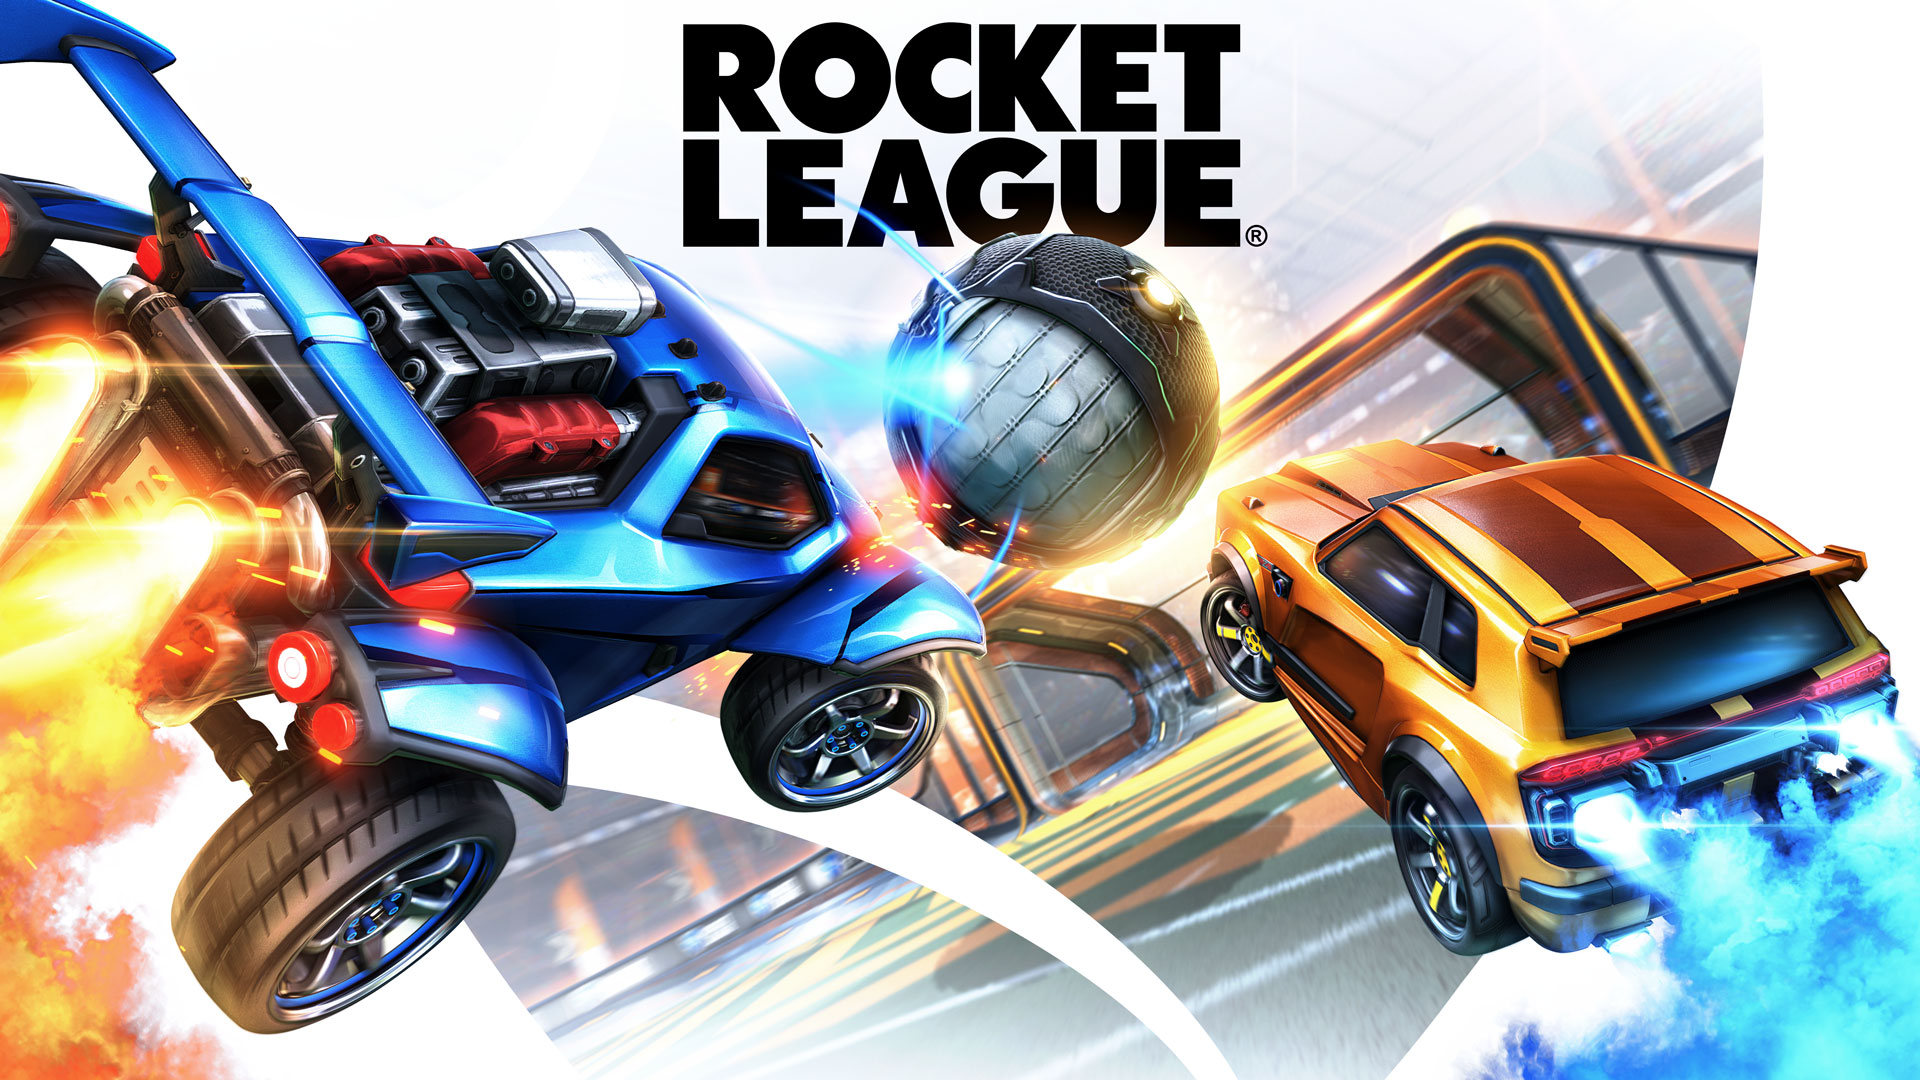 Rocket League launches its new competitive season on all platforms